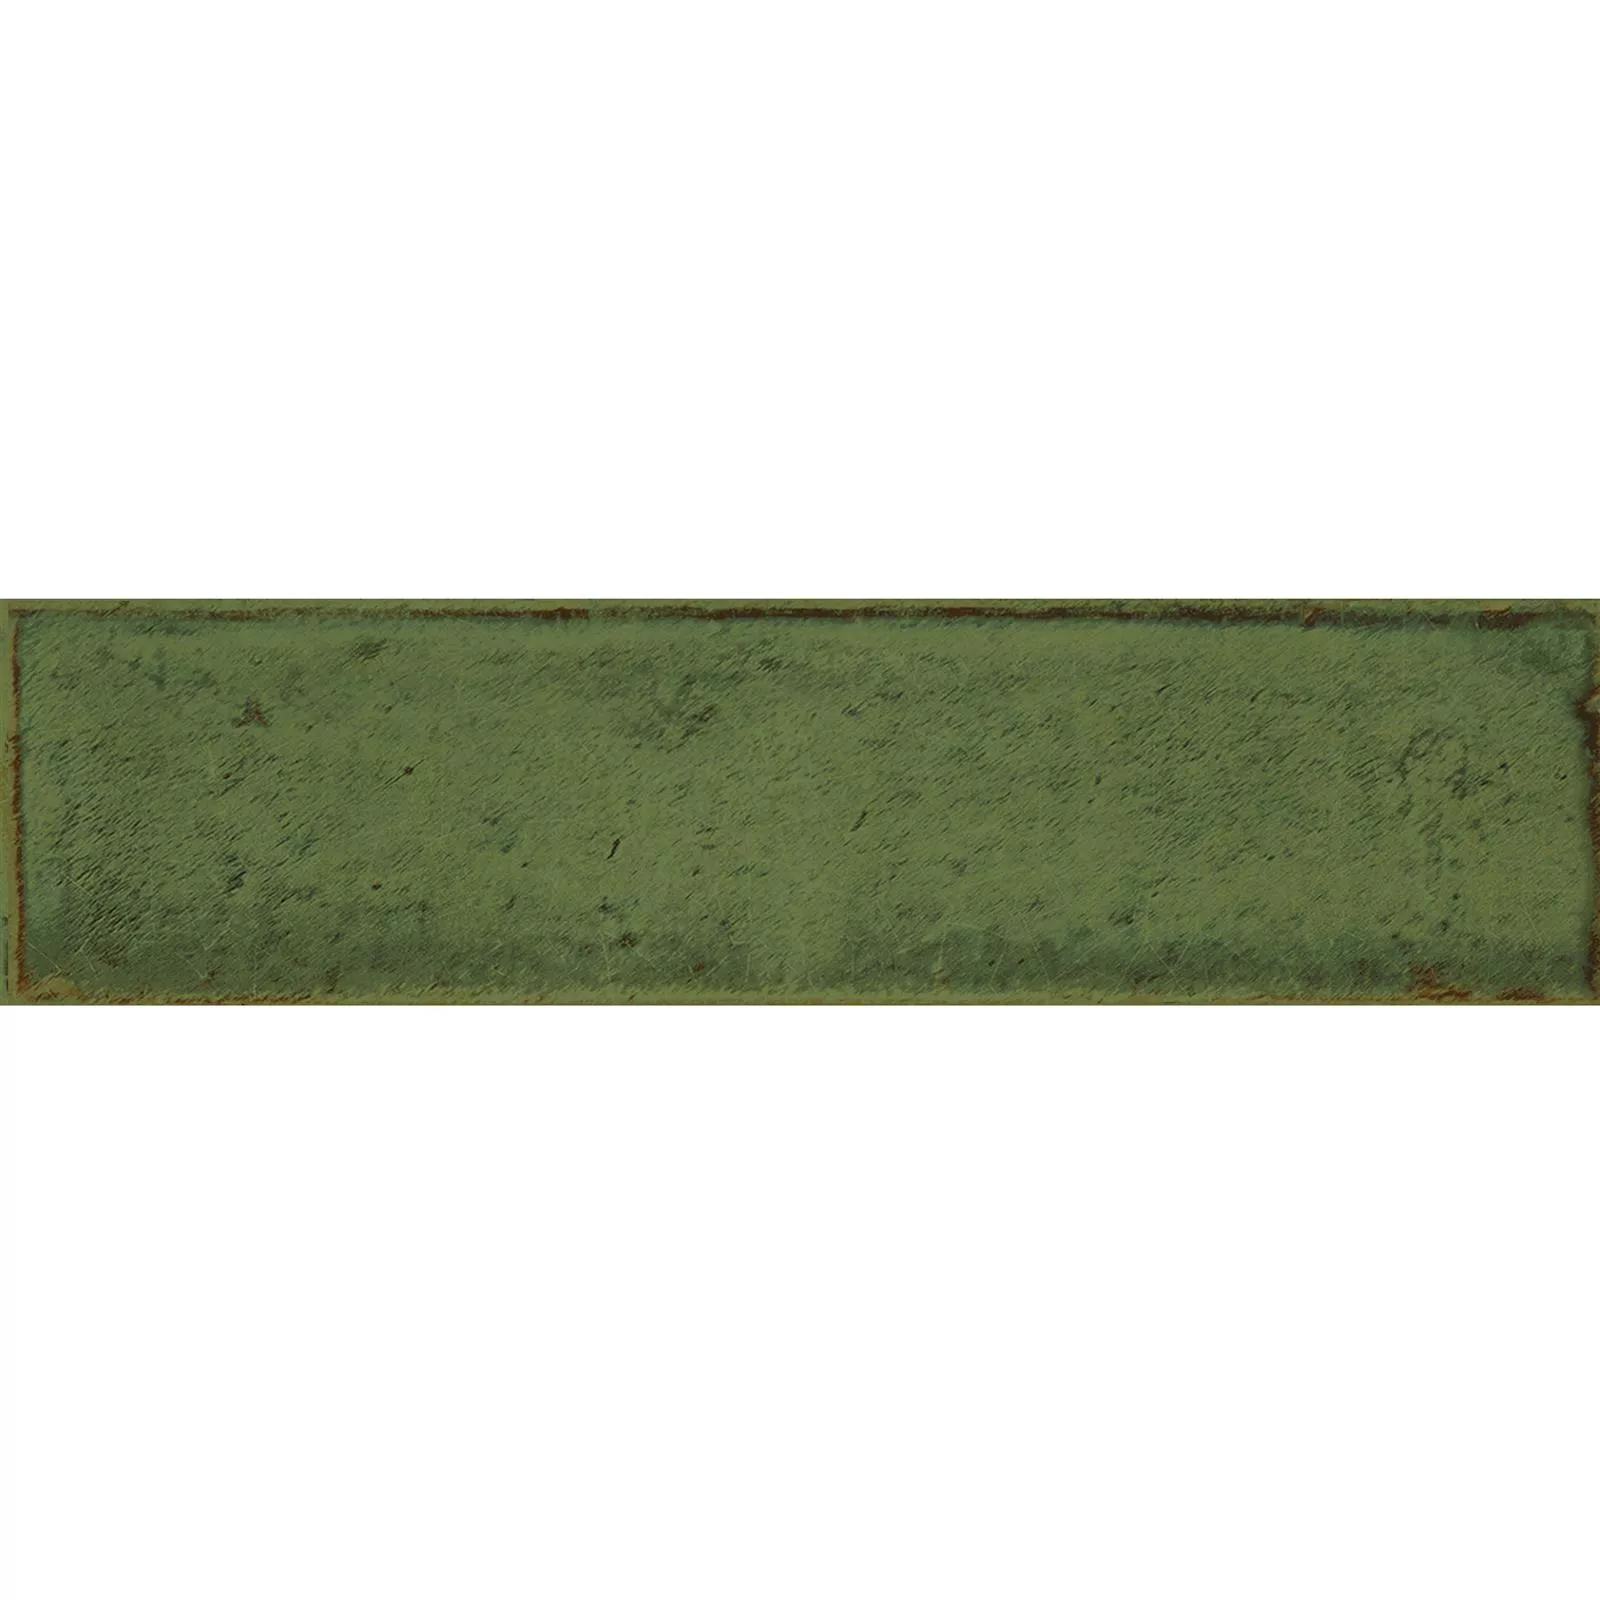 Sample Wall Tiles Maestro Waved Glossy Olive Green 7,5x30cm